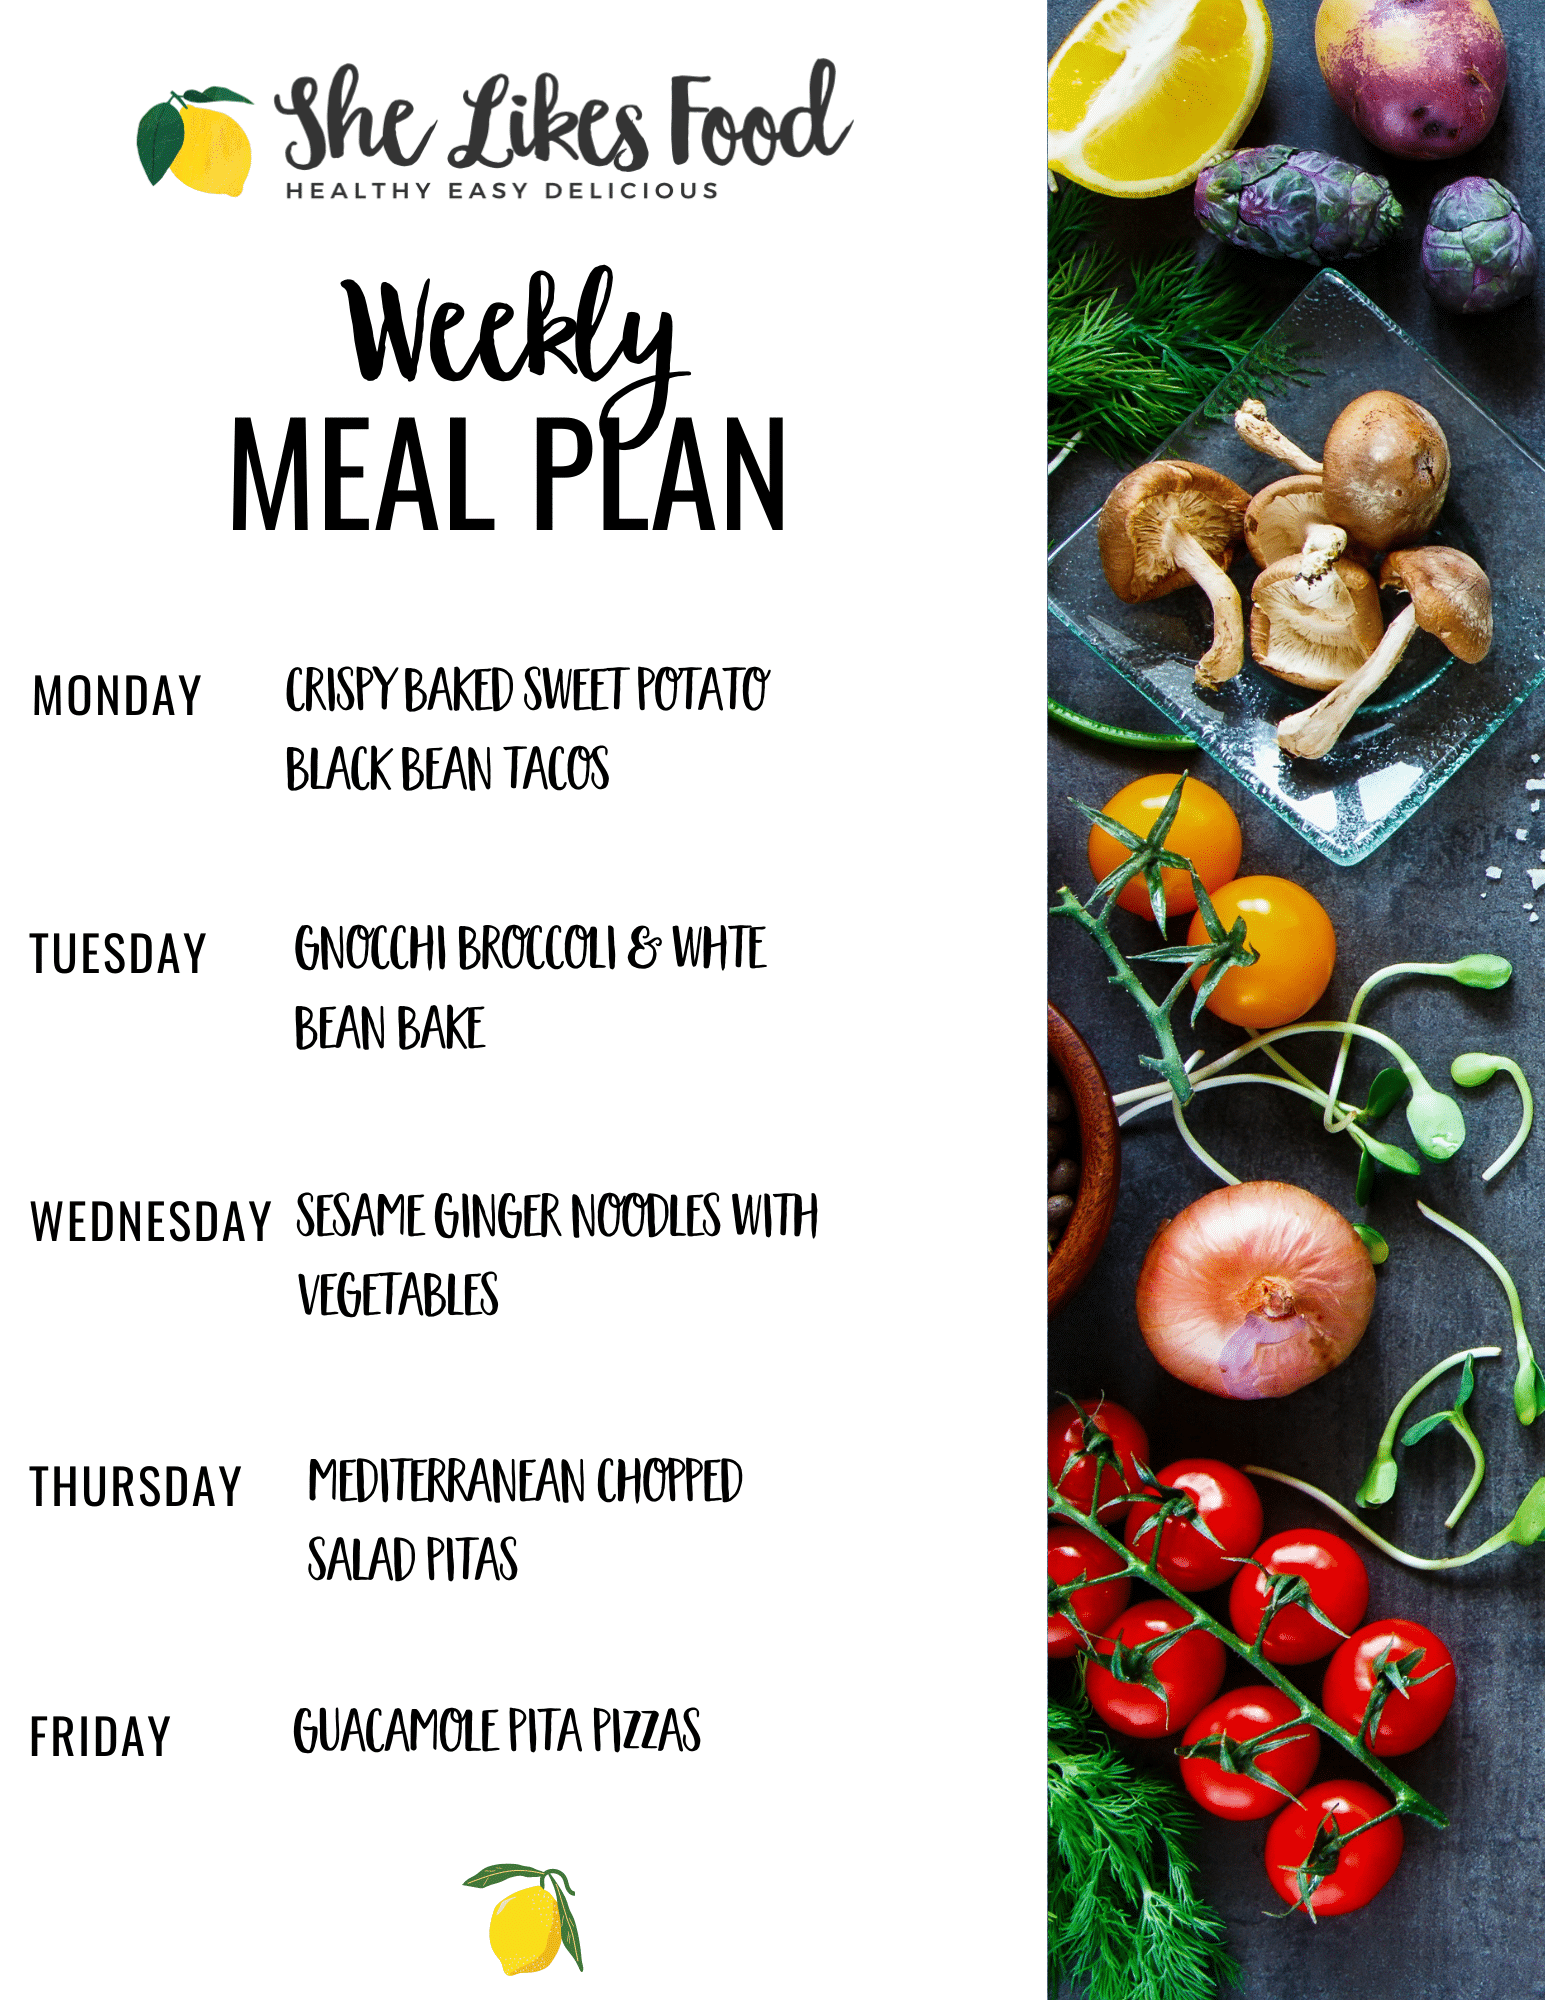 https://www.shelikesfood.com/wp-content/uploads/2021/08/WEEK-4-MEAL-PLAN-2.png